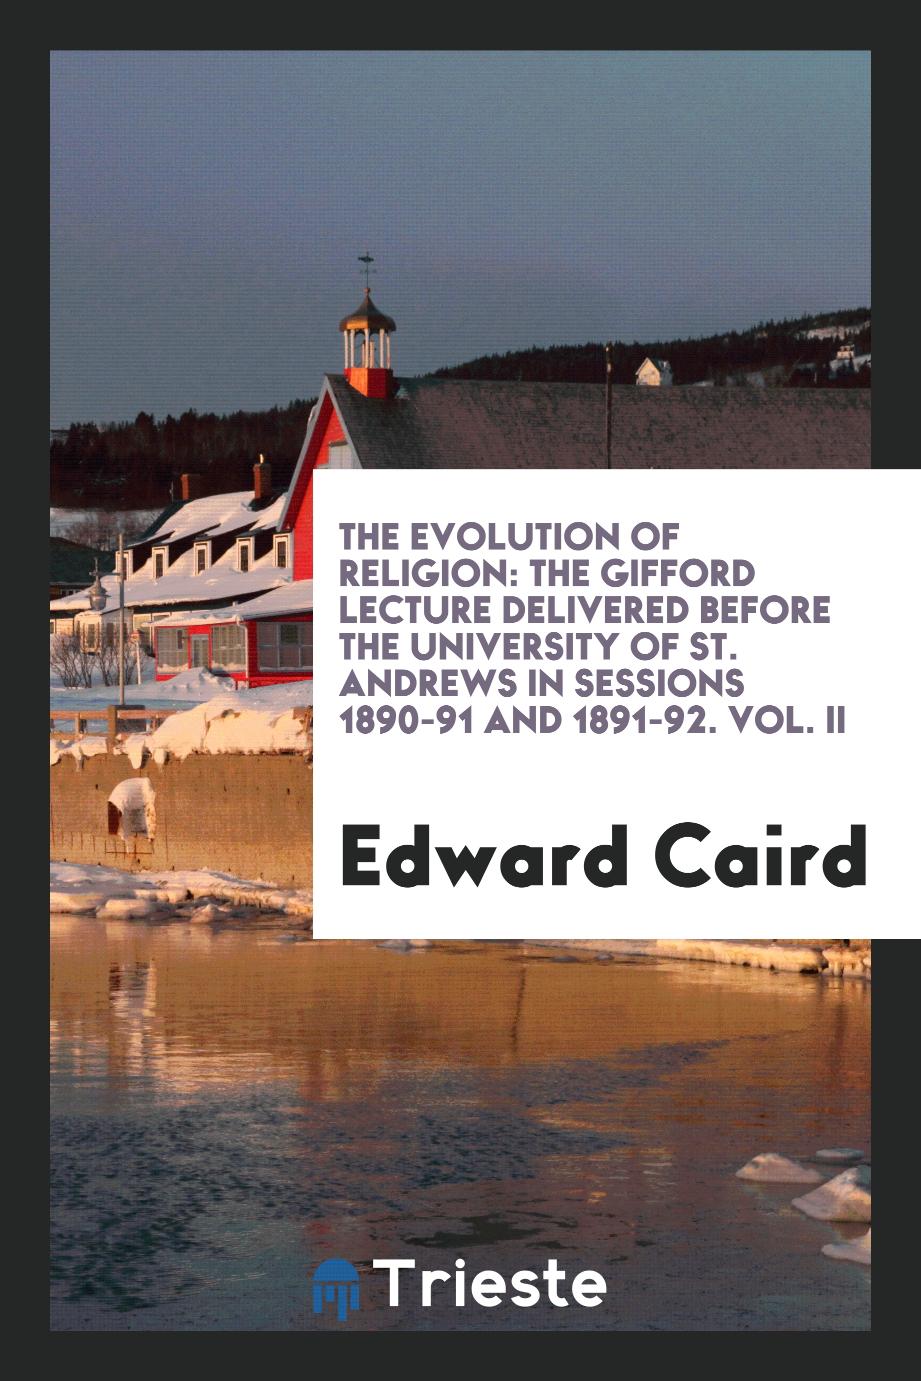 The Evolution of Religion: The Gifford Lecture Delivered Before the University of St. Andrews in Sessions 1890-91 and 1891-92. Vol. II